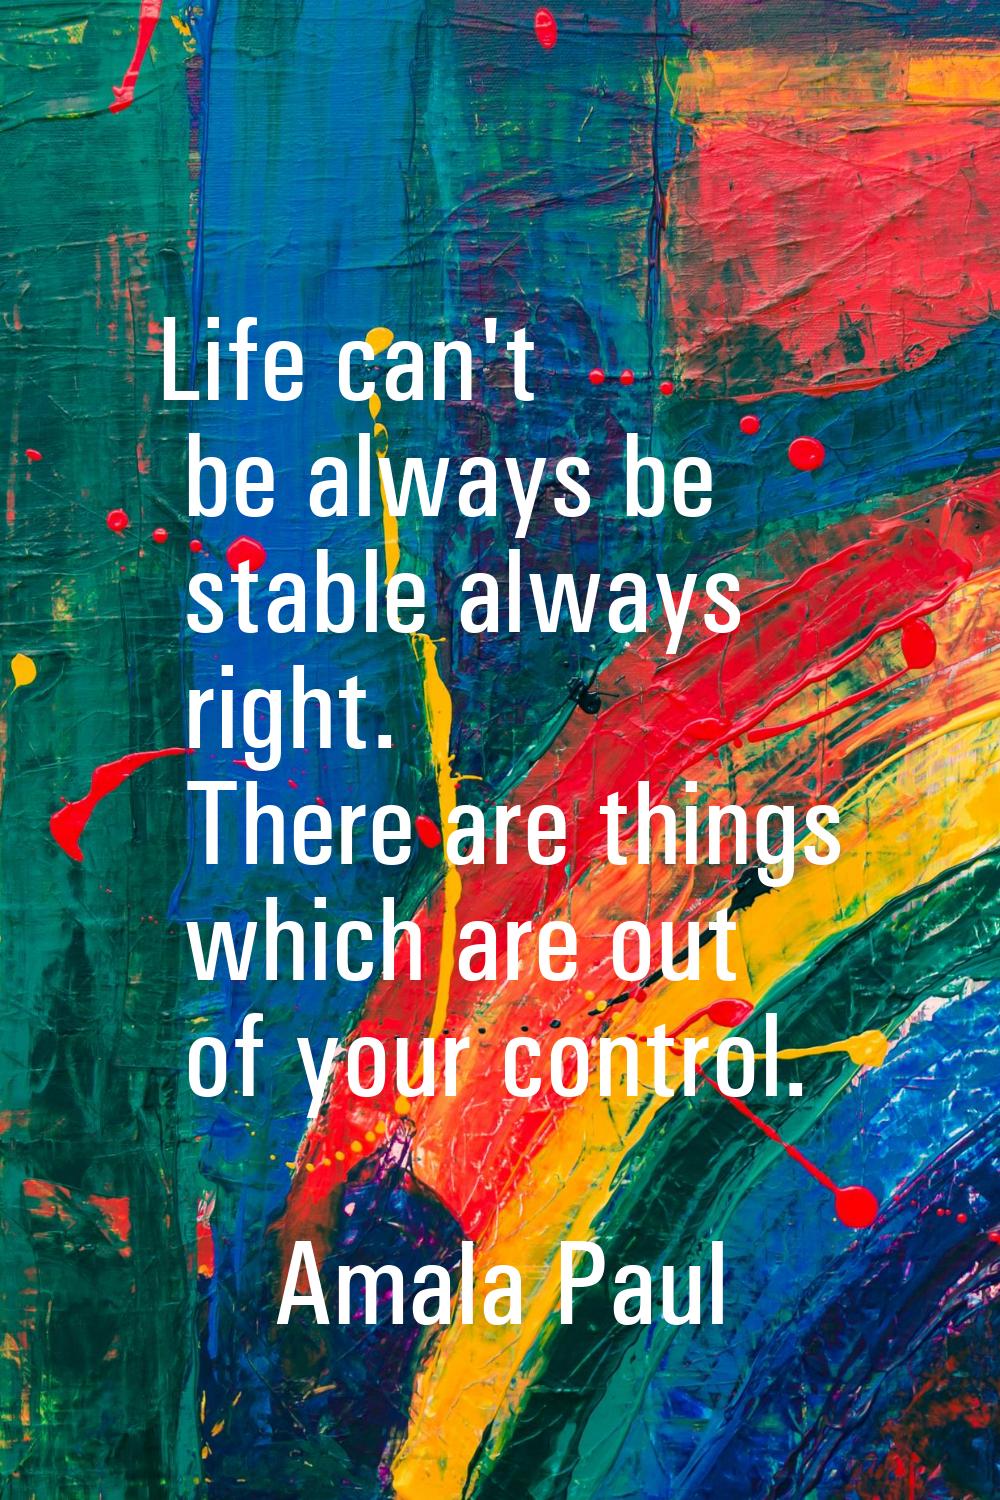 Life can't be always be stable always right. There are things which are out of your control.